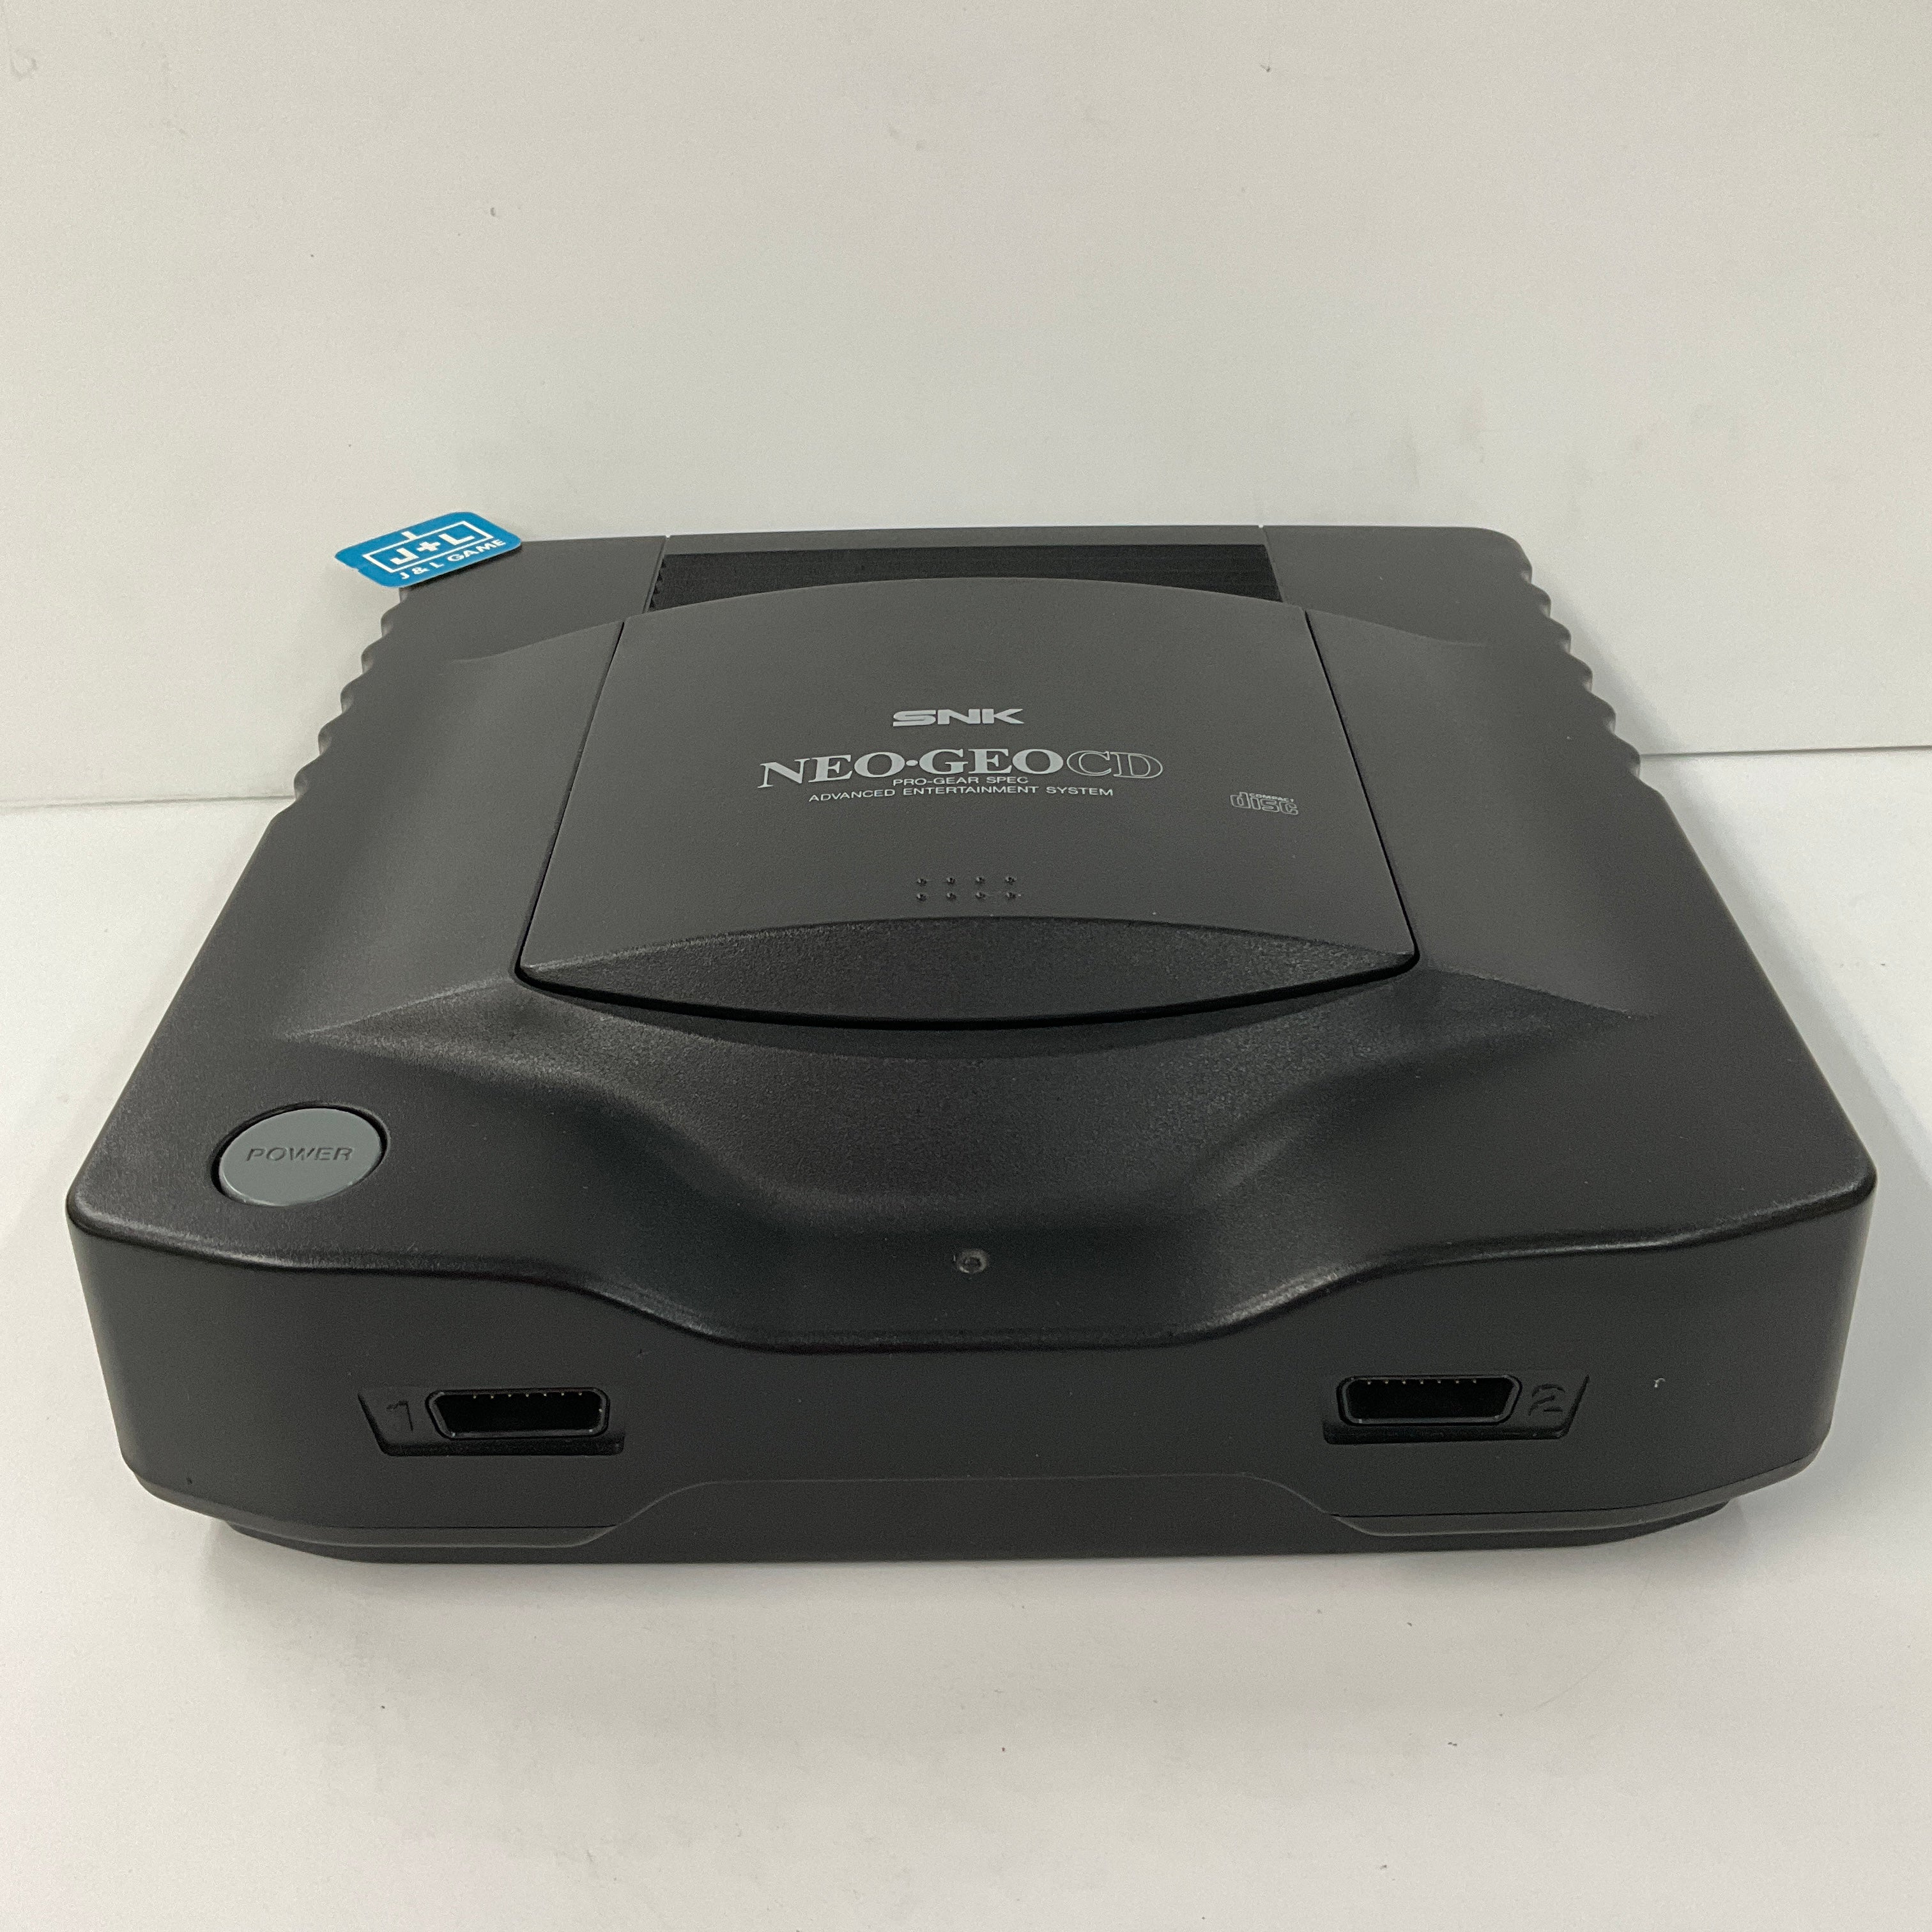 Neo Geo CD Console - SNK NeoGeo CD (Japanese Import) [Pre-Owned]